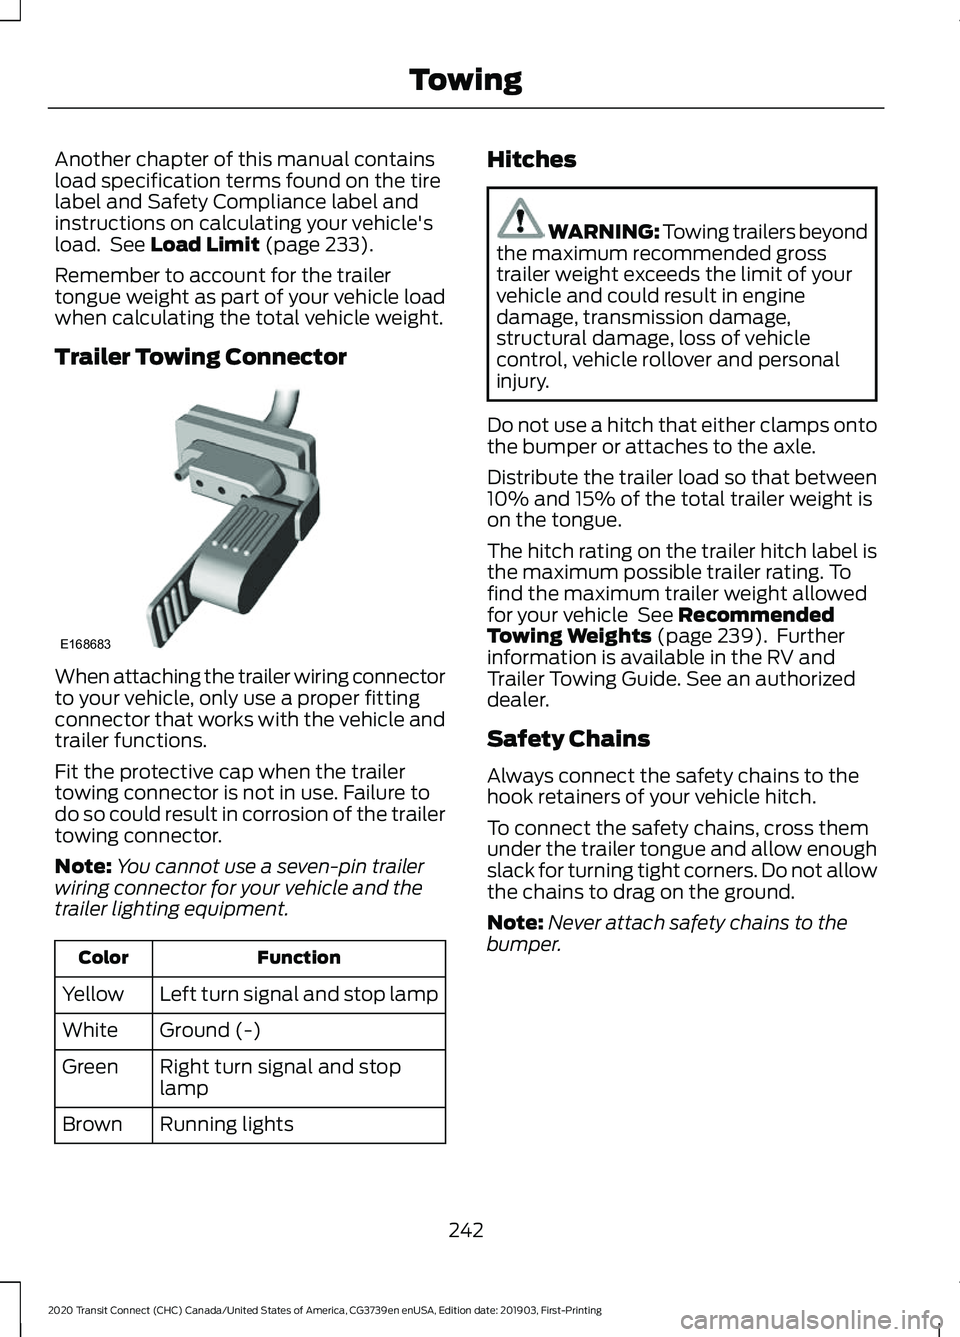 FORD TRANSIT CONNECT 2020  Owners Manual Another chapter of this manual contains
load specification terms found on the tire
label and Safety Compliance label and
instructions on calculating your vehicle's
load.  See Load Limit (page 233)